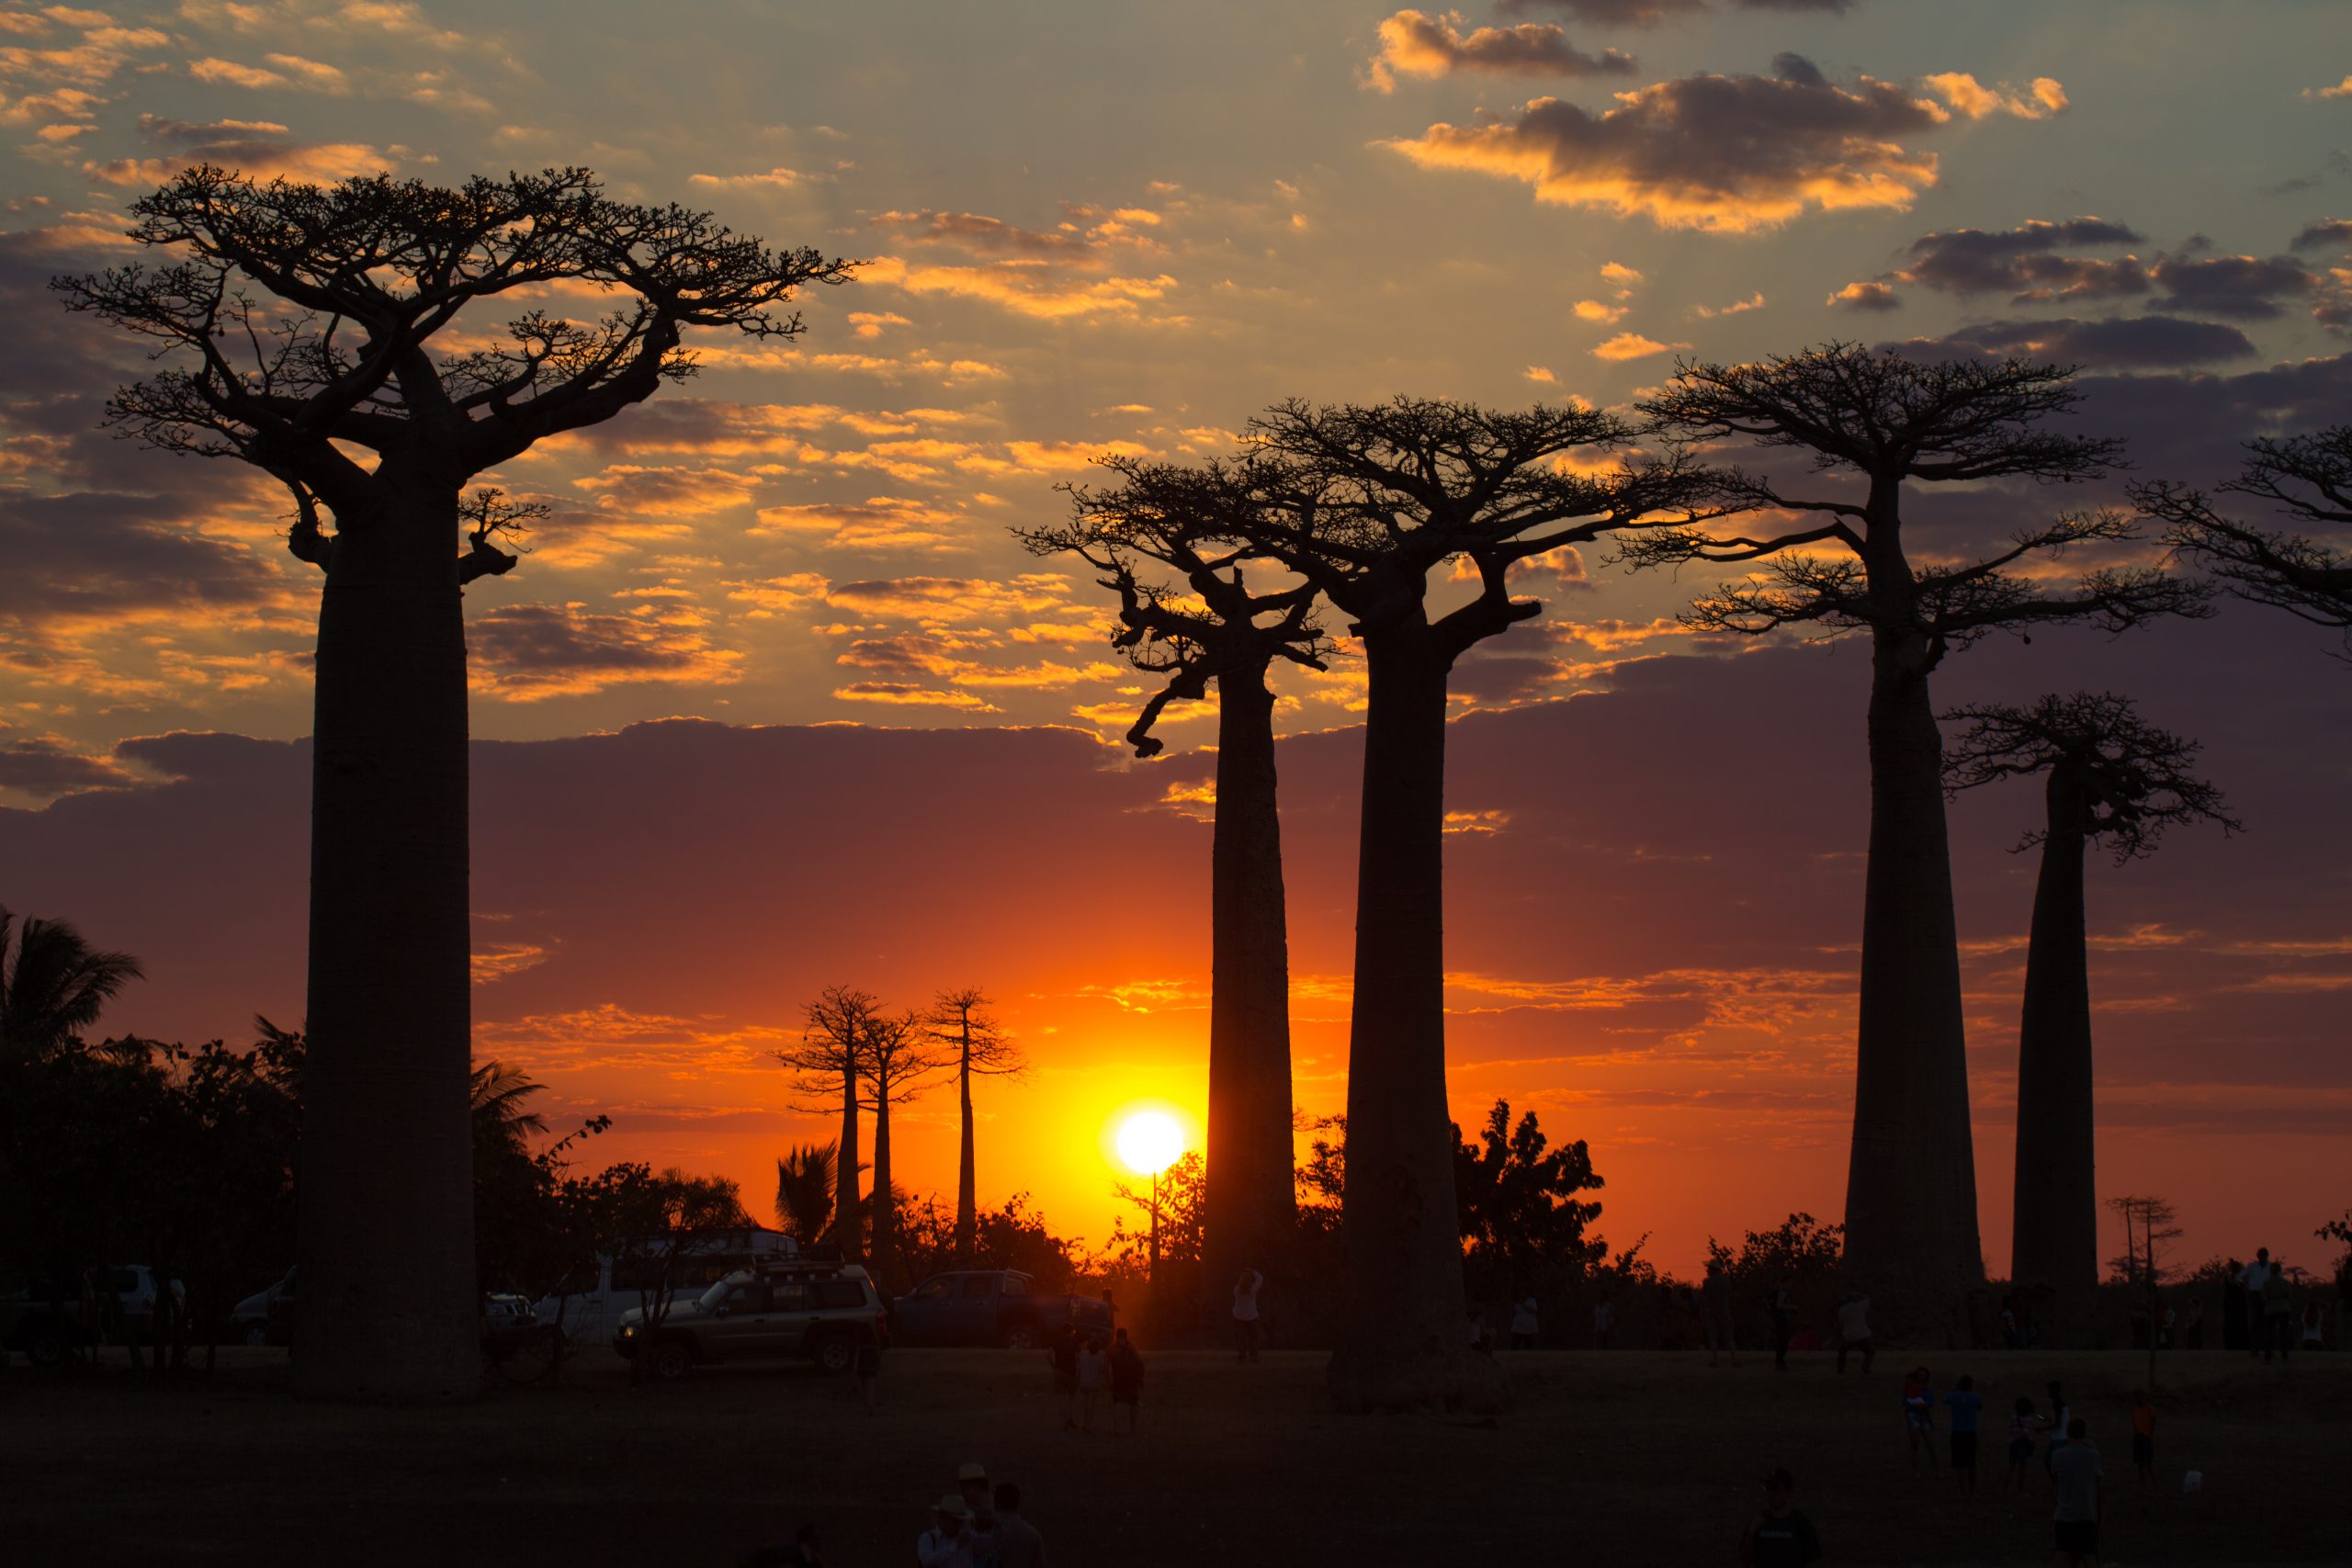 Avenue of the baobabs in southwest Madagascar at sunset